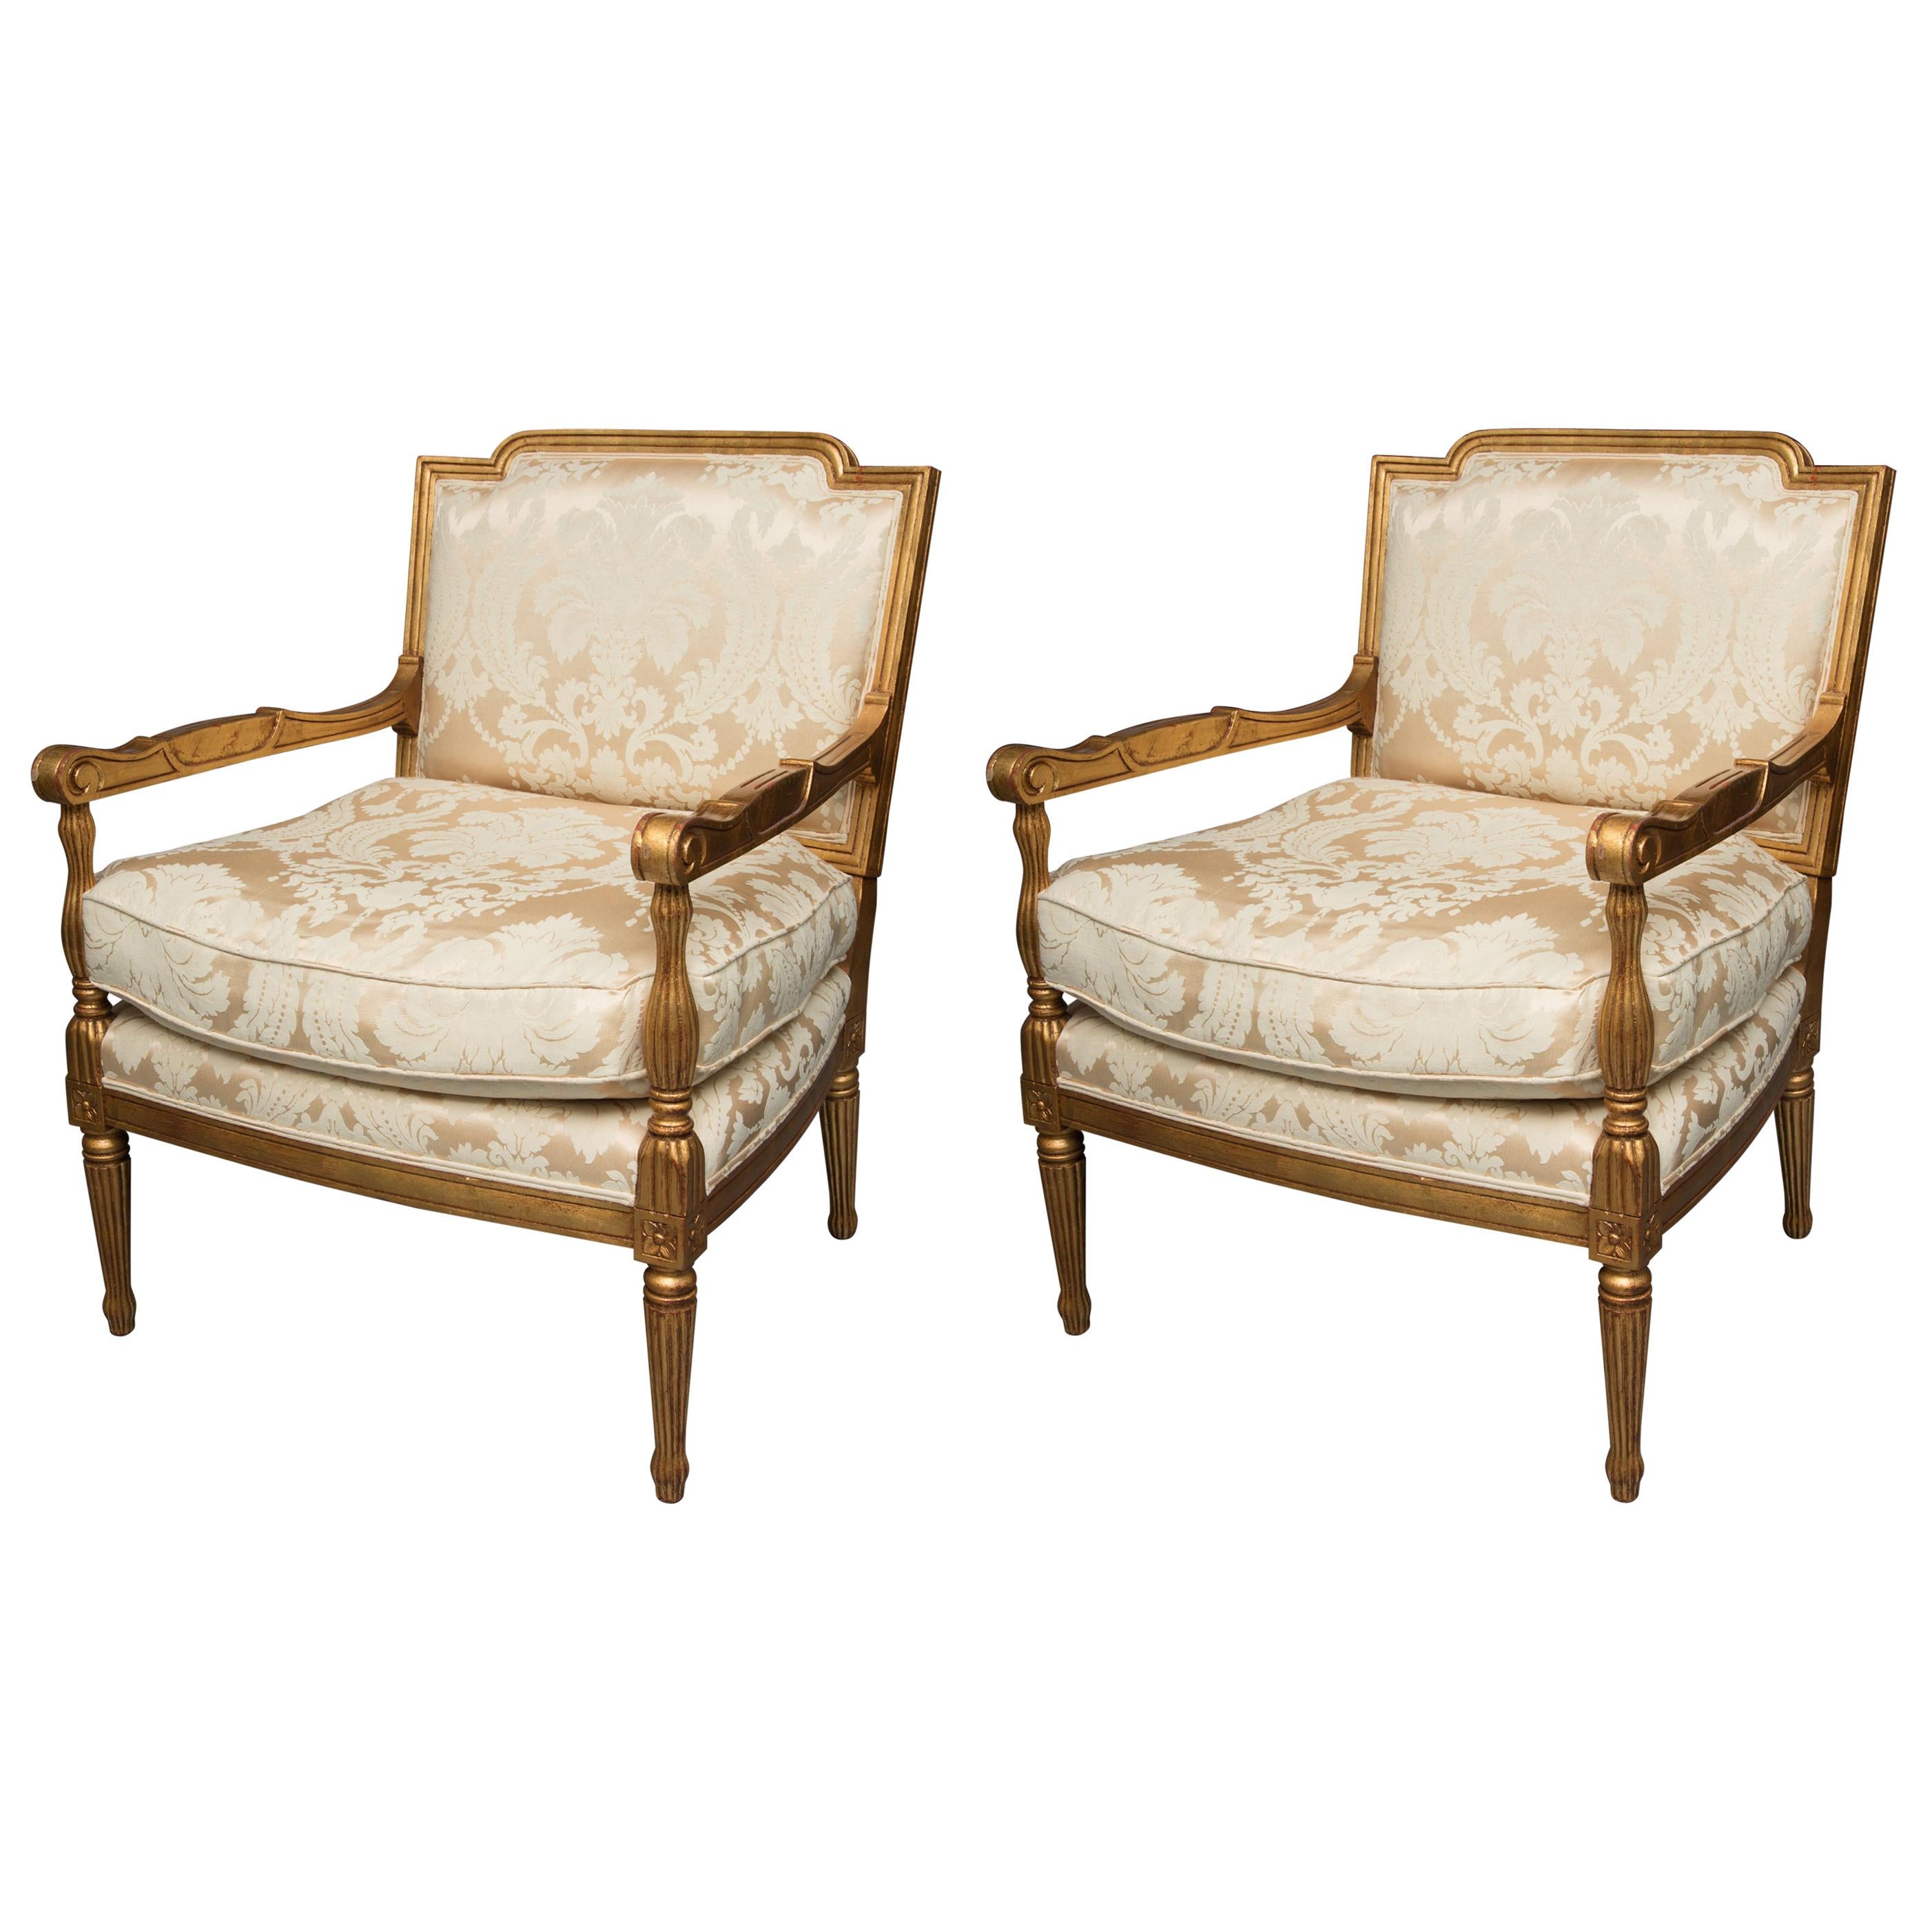 Mid-20th Century French Louis XVI Fauteuil Chairs